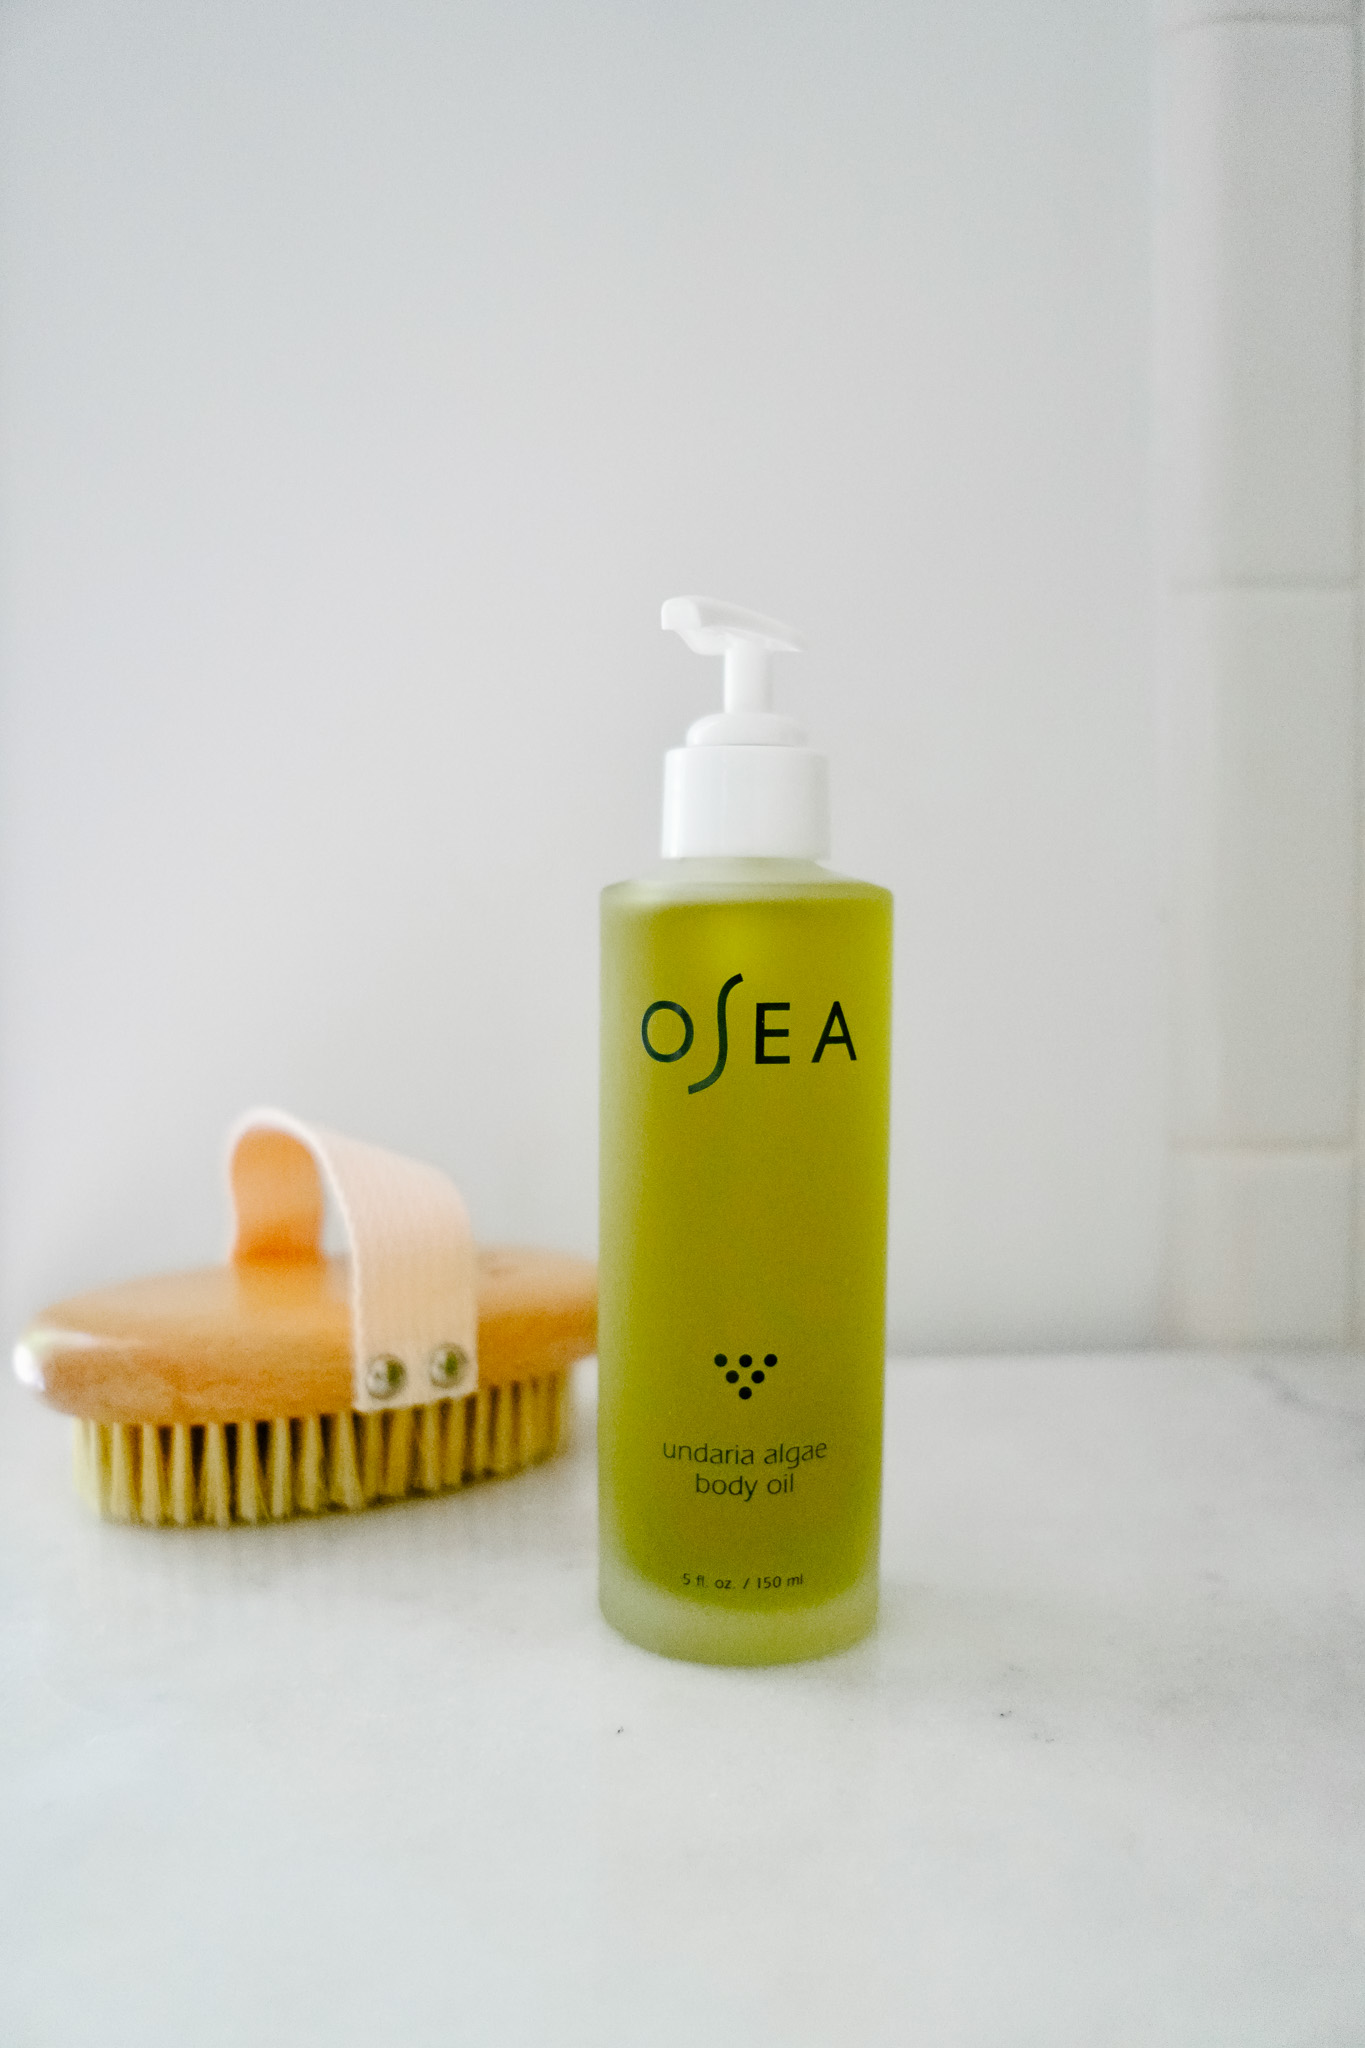 OSEA body oil on the counter